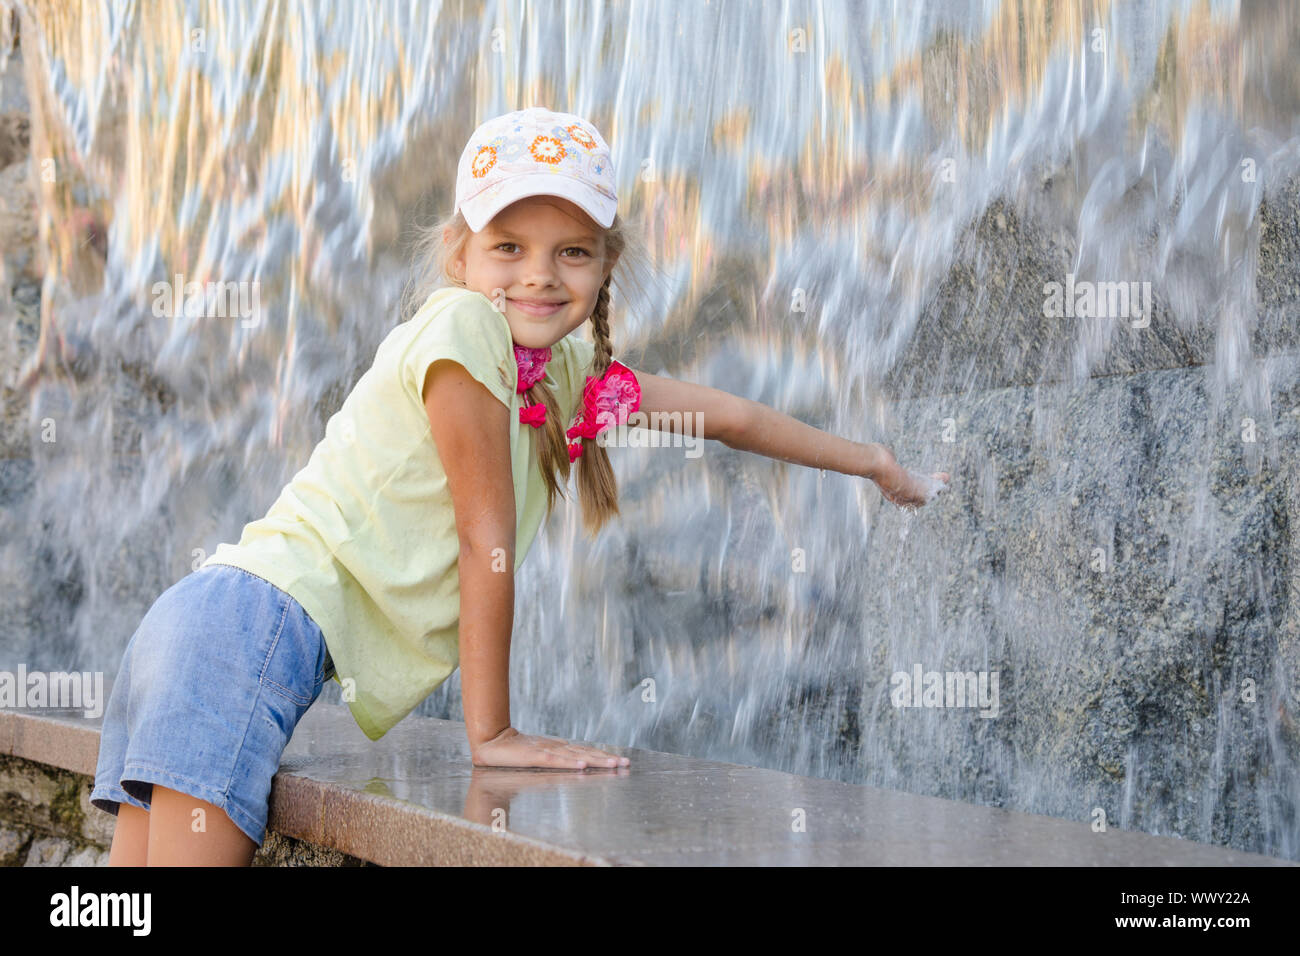 Girl in summer clothes with a smile stretching his hand to water the artificial waterfall Stock Photo